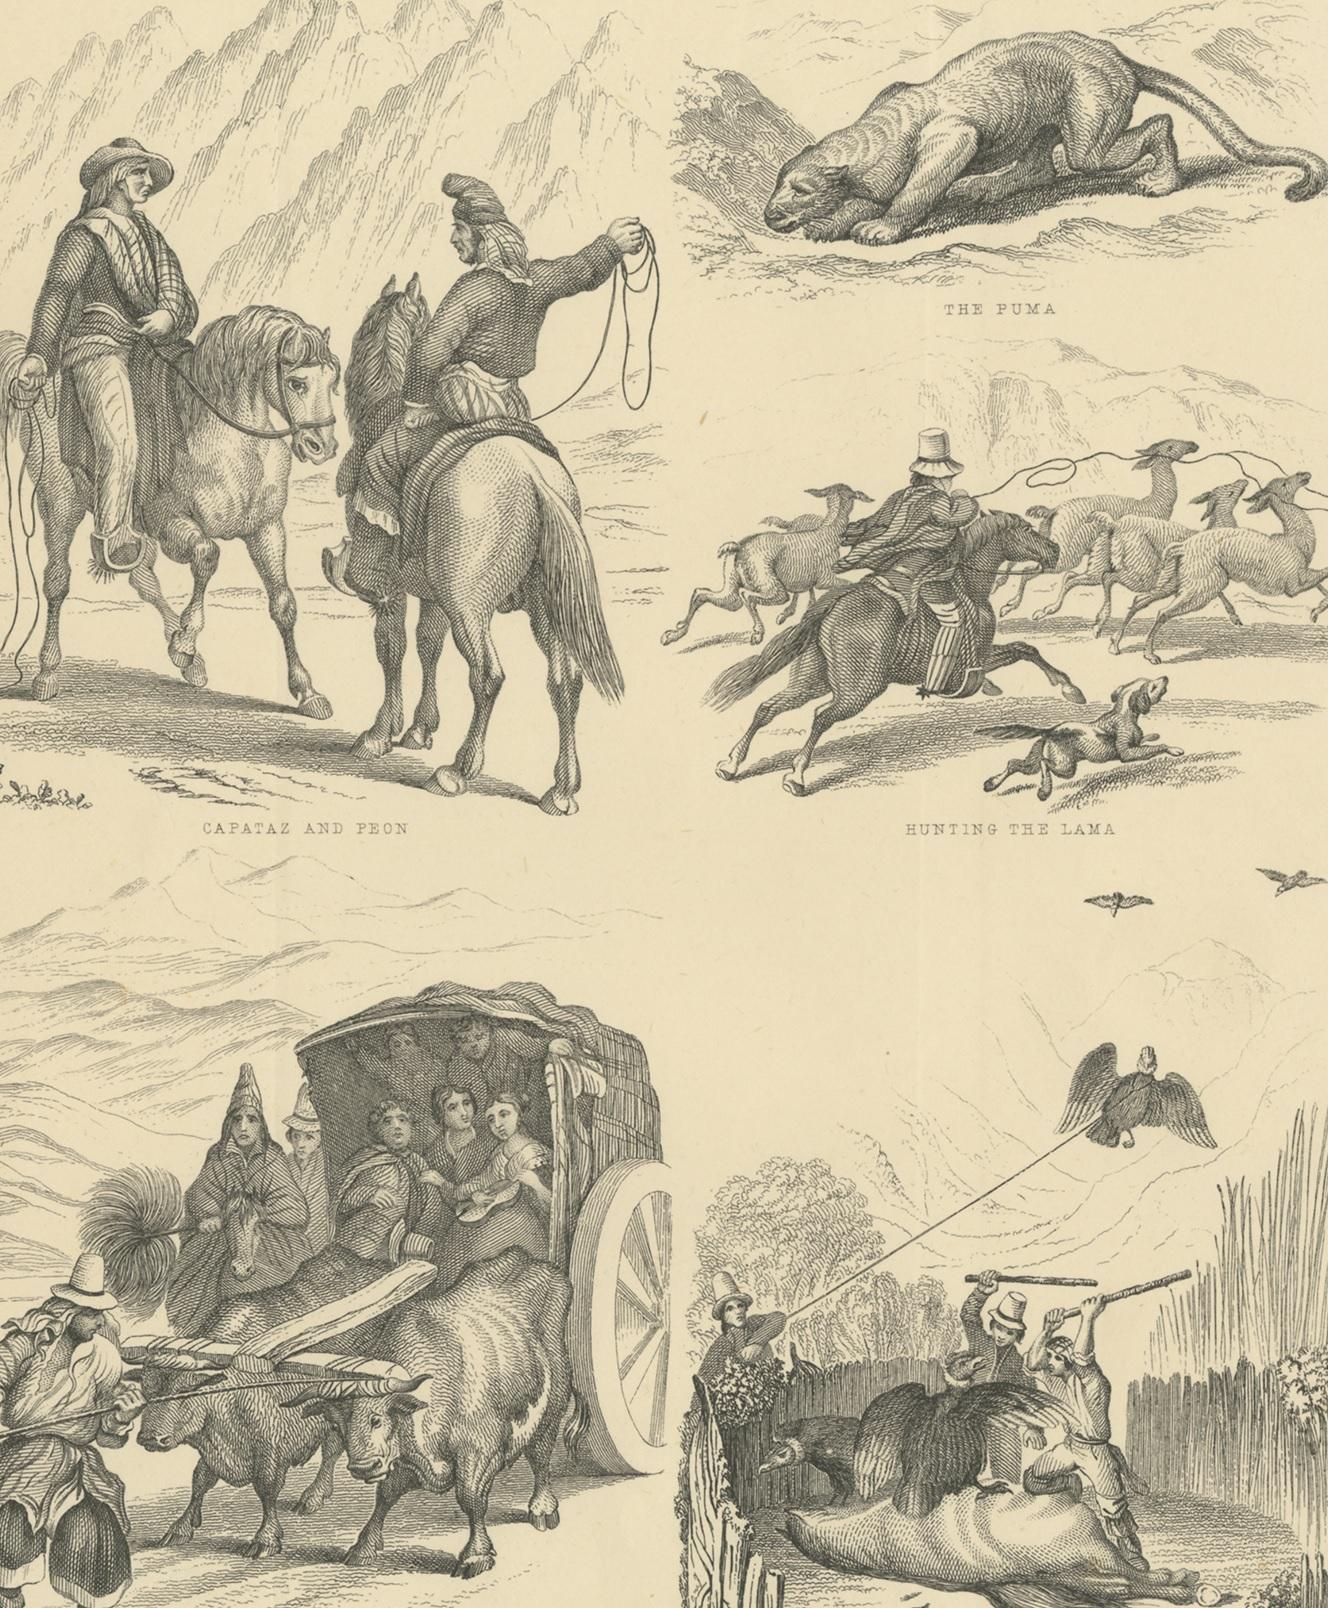 Antique print titled 'West Coast of South America I'. Lithographs with small views of Capataz and Peon - the Puma - Hunting the Lama - Travelling in Santiago - Chase of the Condor'. Published by Thomas G. Jack.